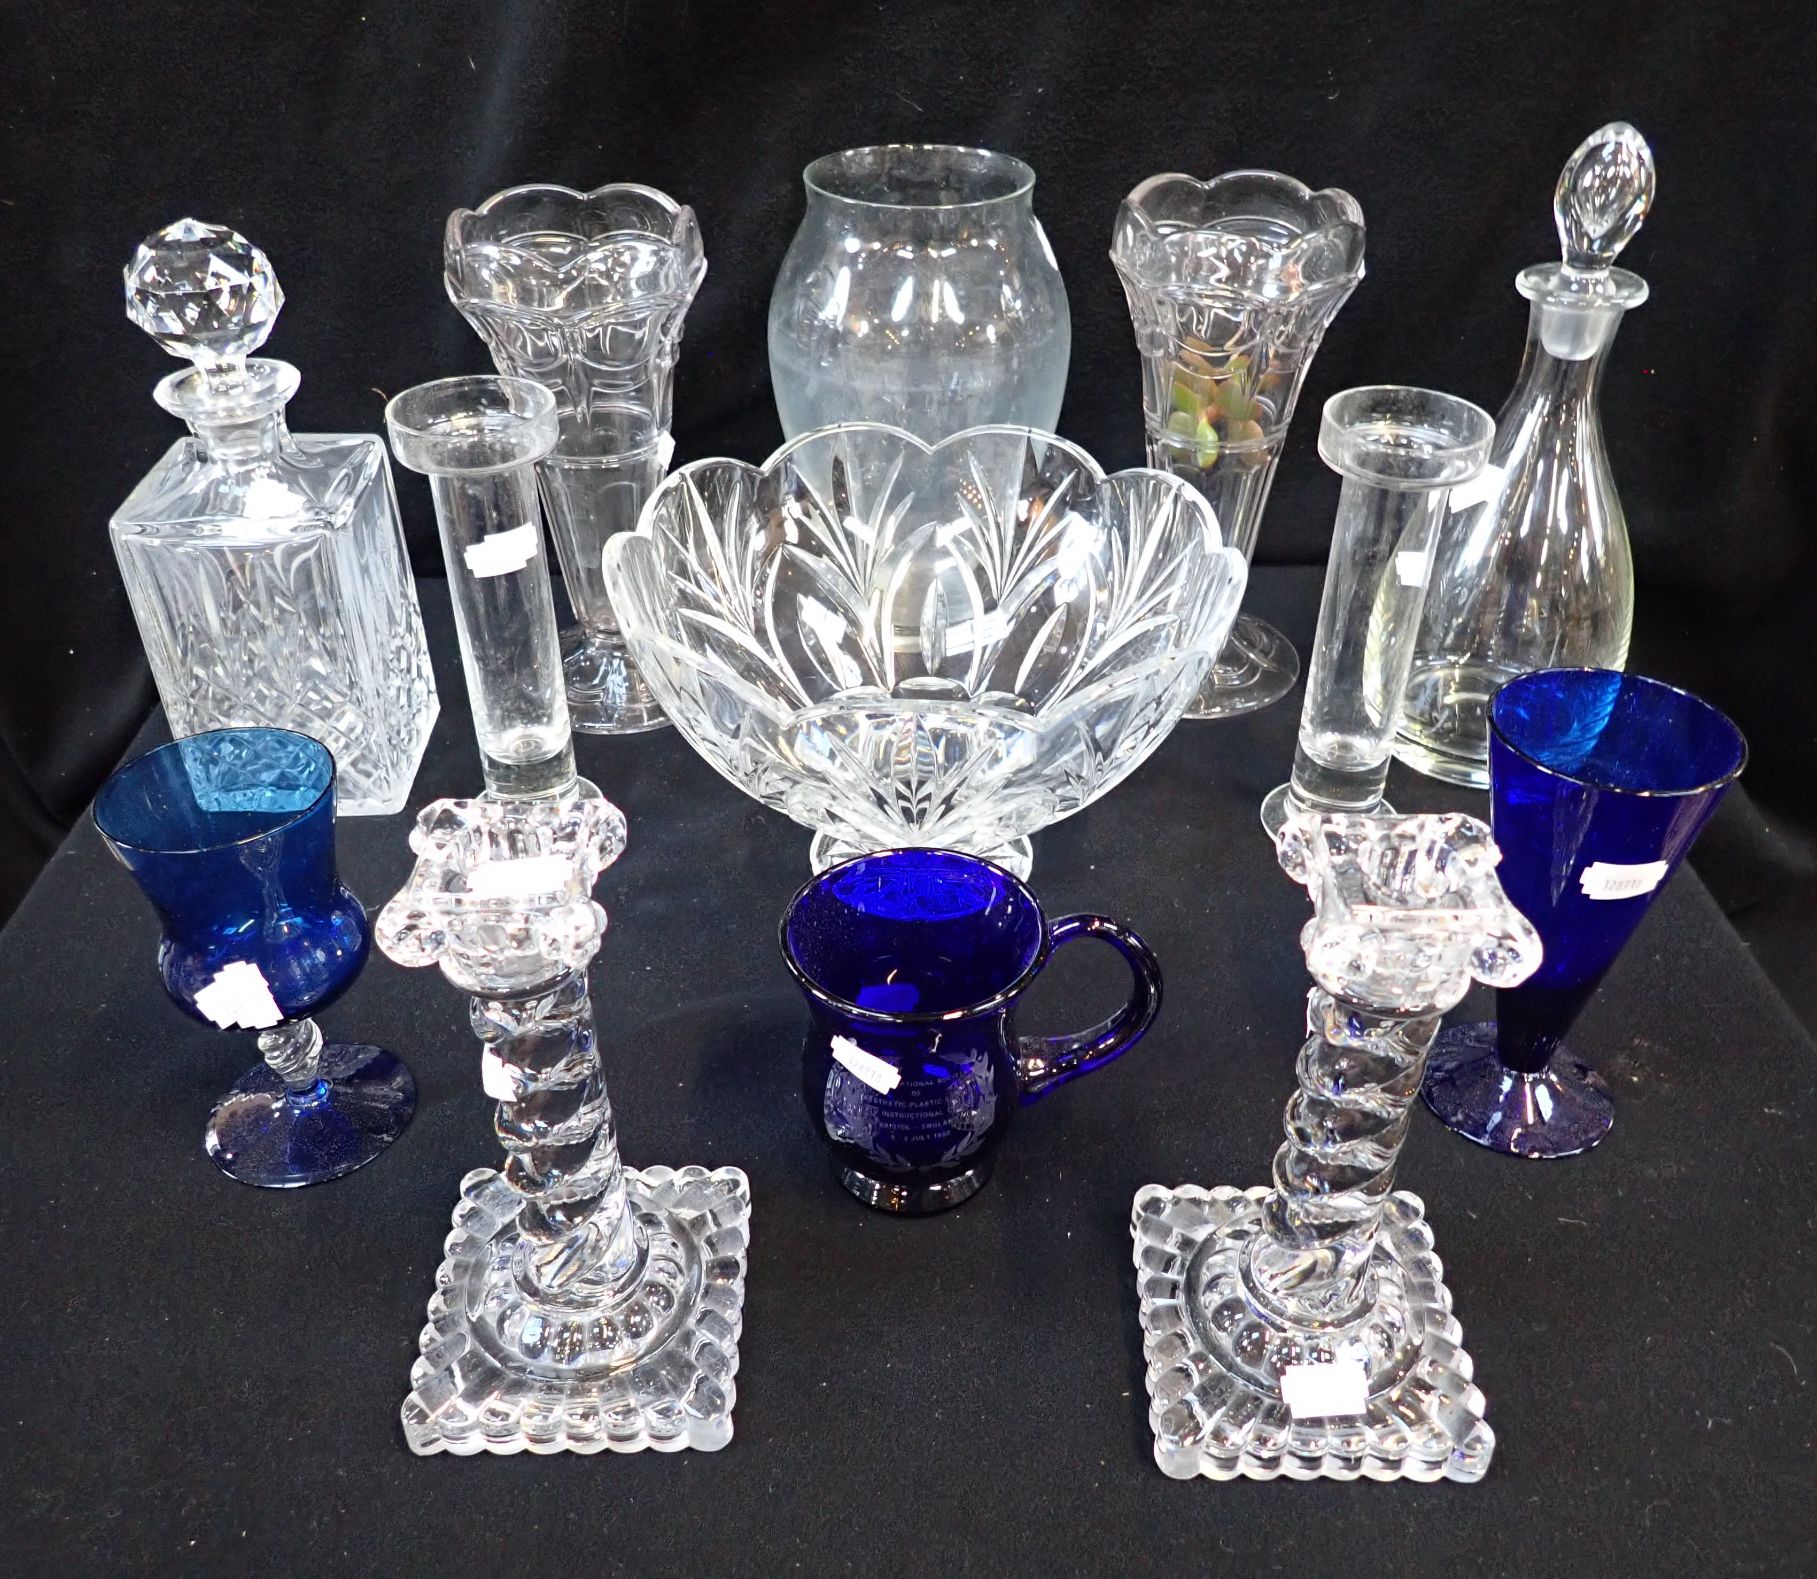 A PAIR OF EARLY VICTORIAN PRESSED GLASS CANDLESTICKS